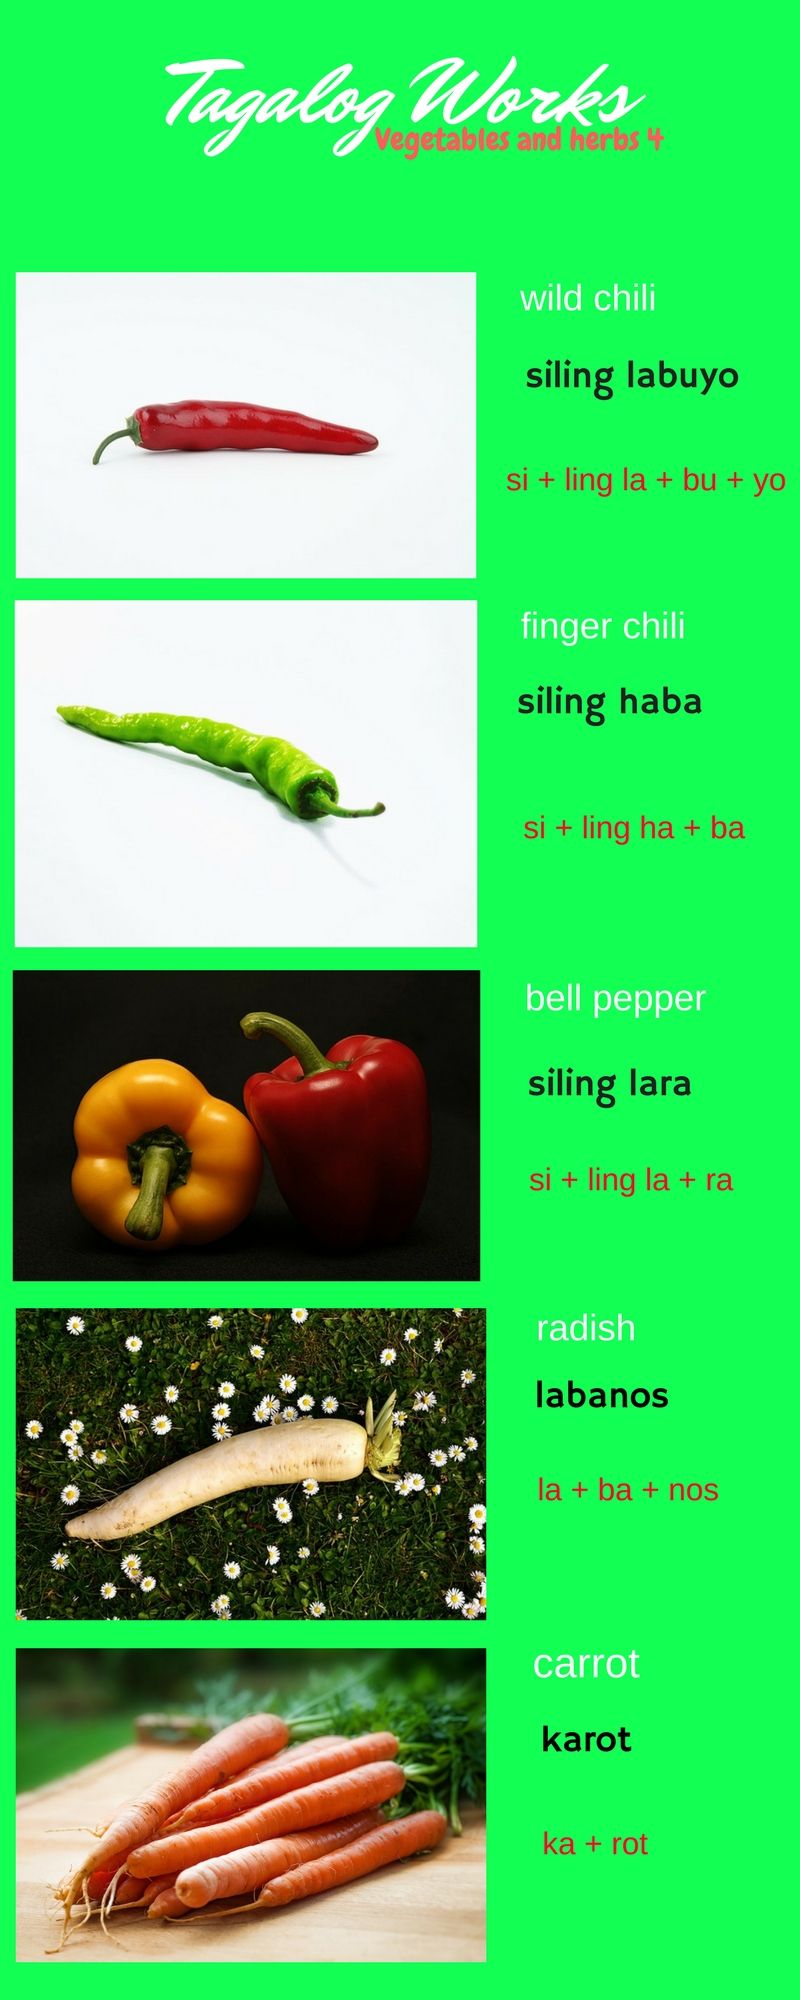 what is capsicum in tagalog